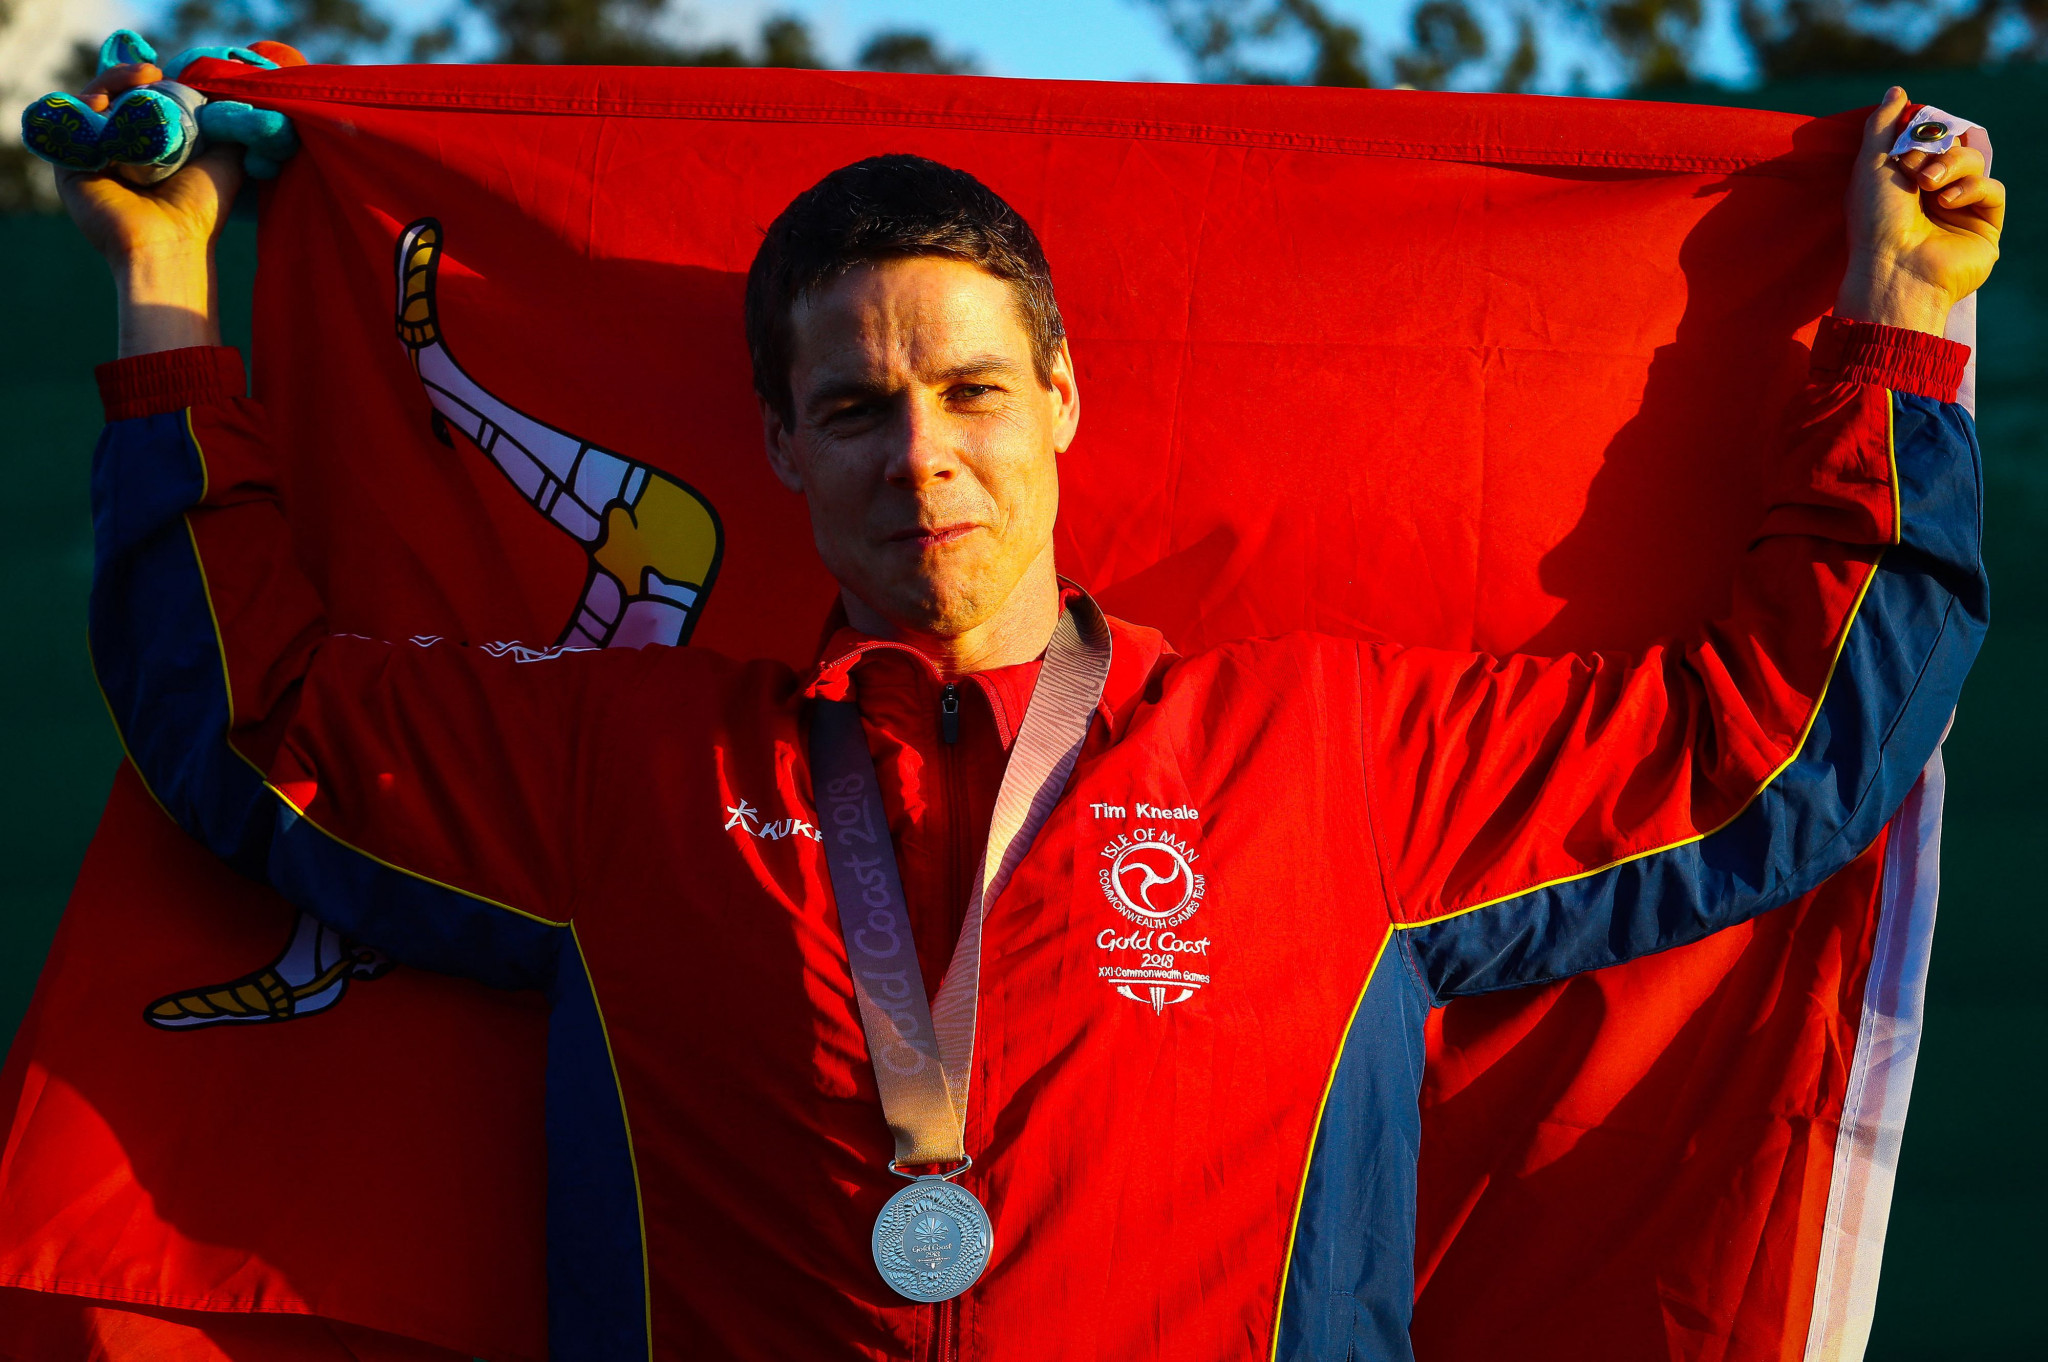 Tim Kneale won shooting silver for the Isle of Man at Gold Coast 2018, but the sport is not on the Birmingham 2022 programme ©Getty Images